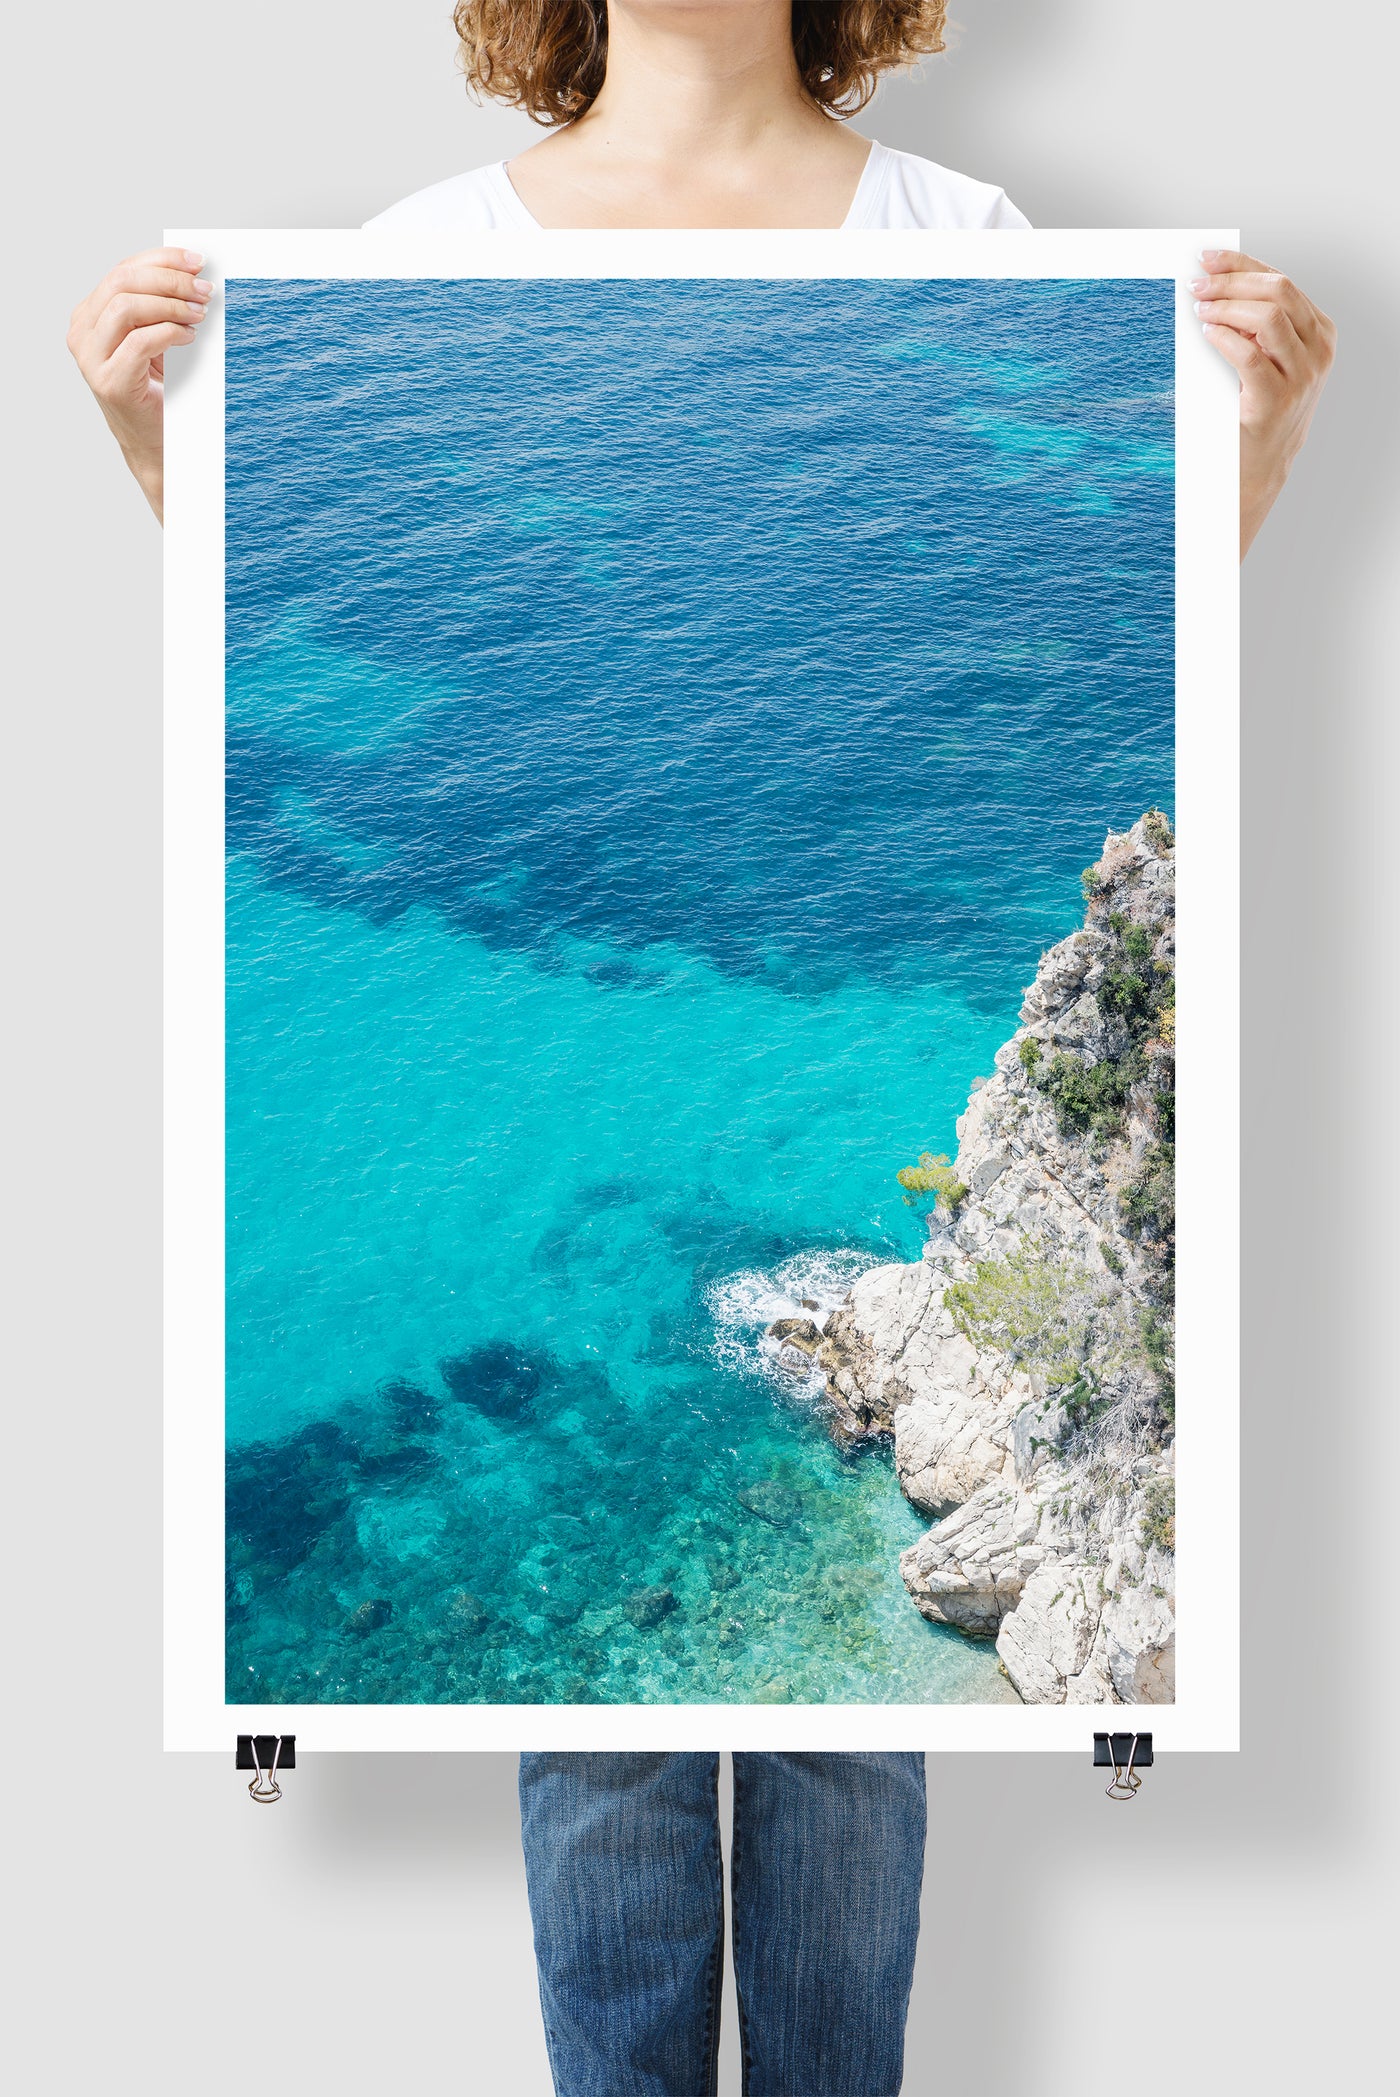 The Mediterranean No 4 - Art print by Cattie Coyle Photography